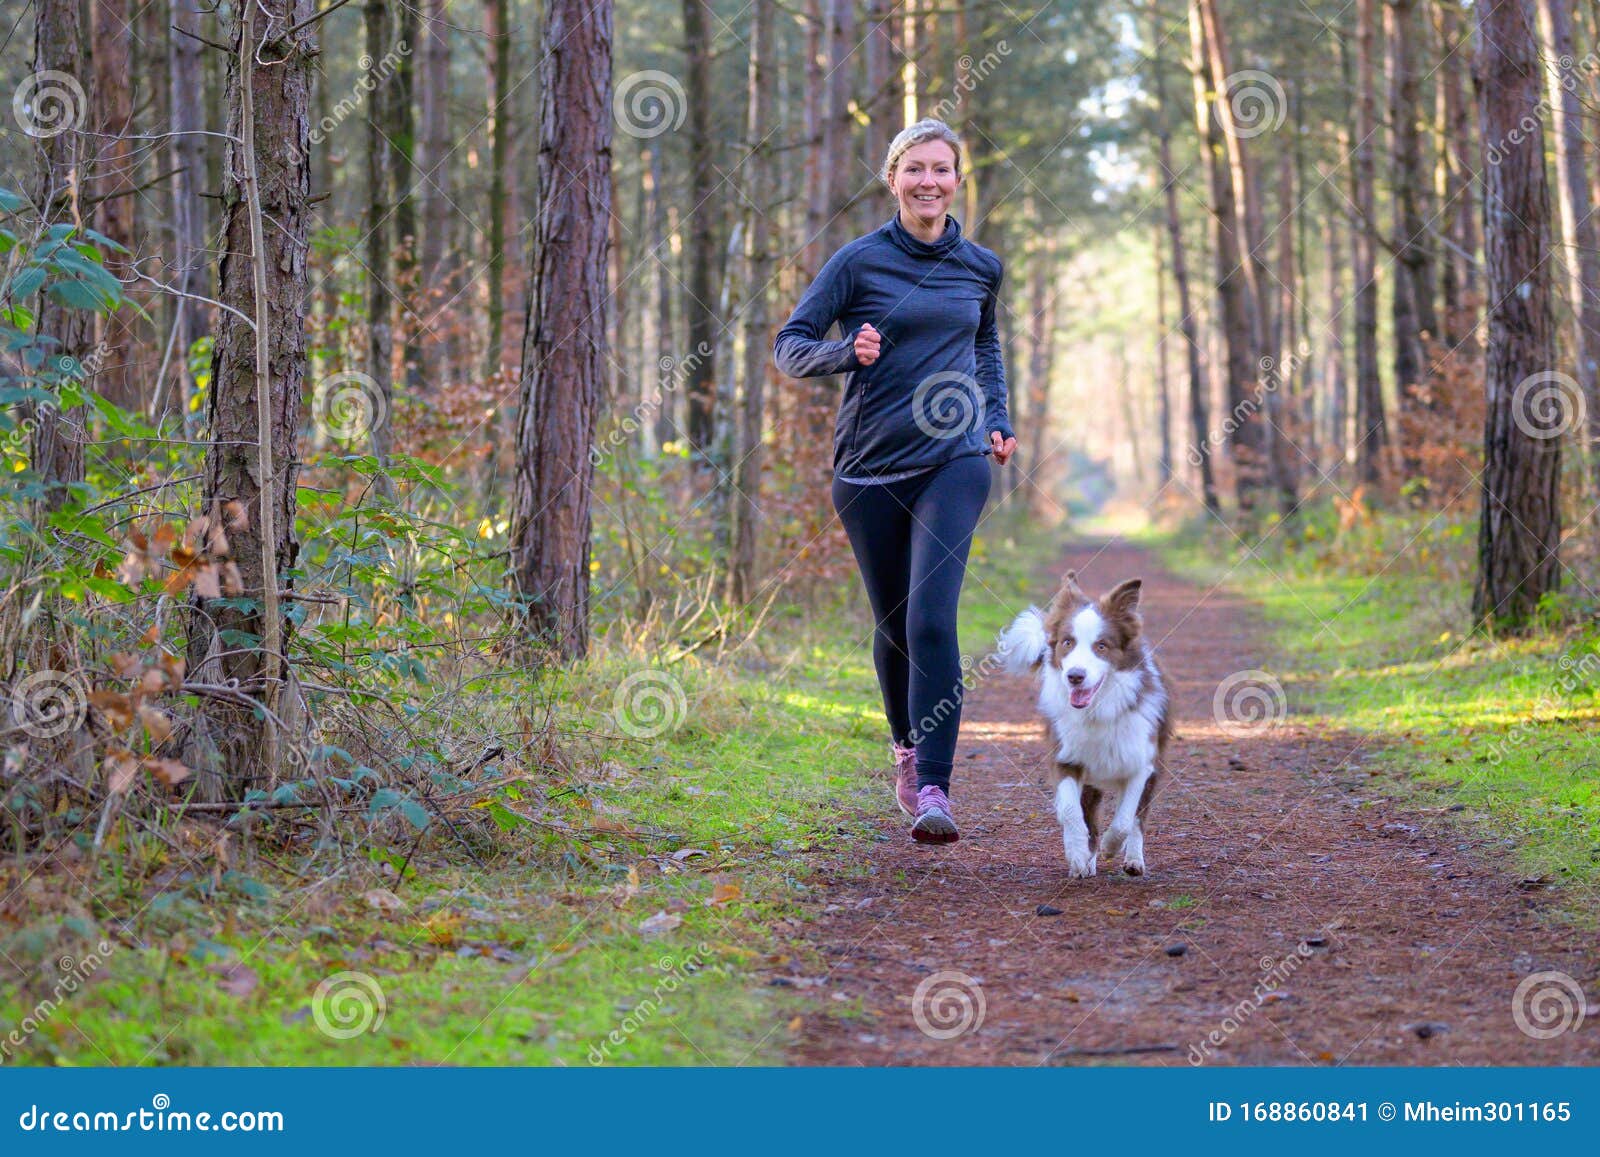 happy woman full of vitality exercising her dog